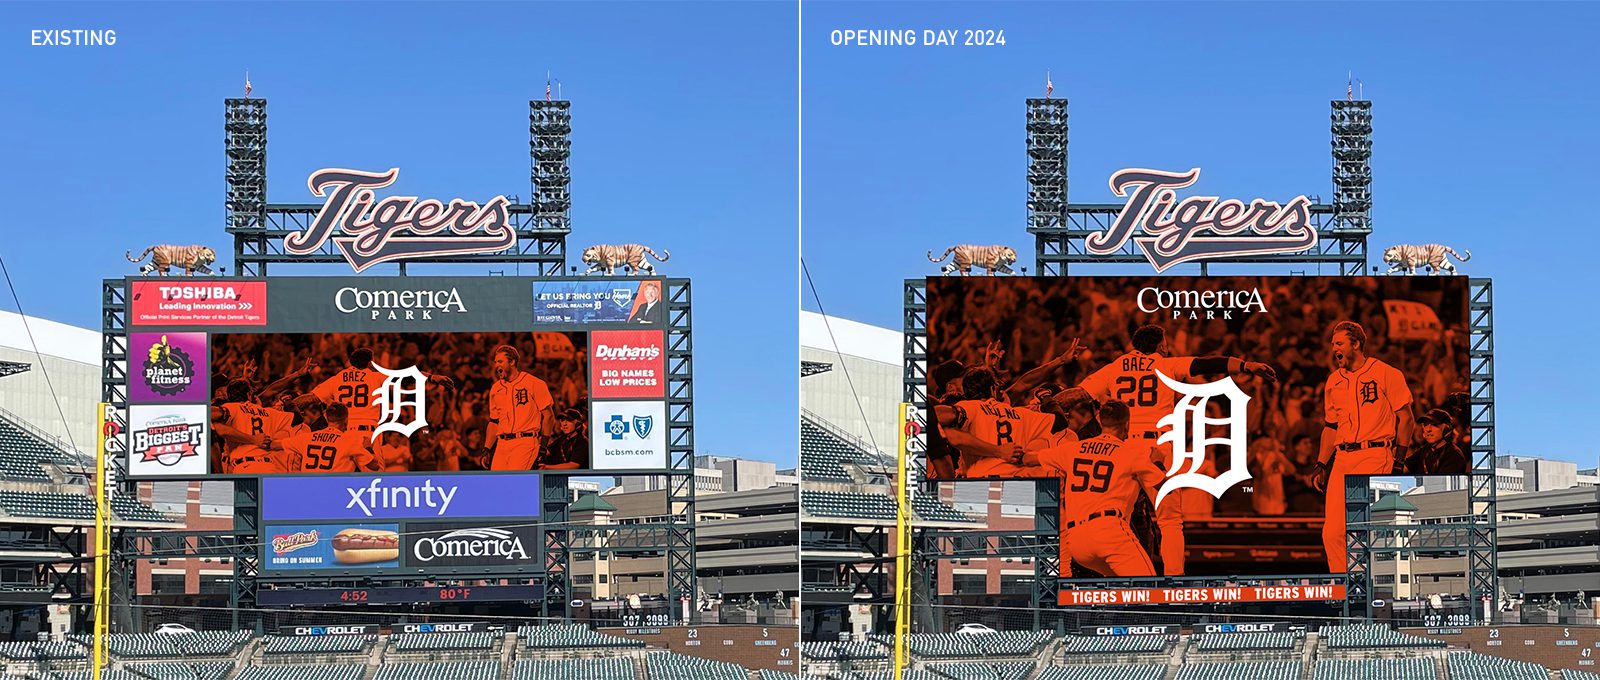 A side by side comparison of the current scoreboard at Comerica Park and the new one to be installed ahead of the 2024 season.